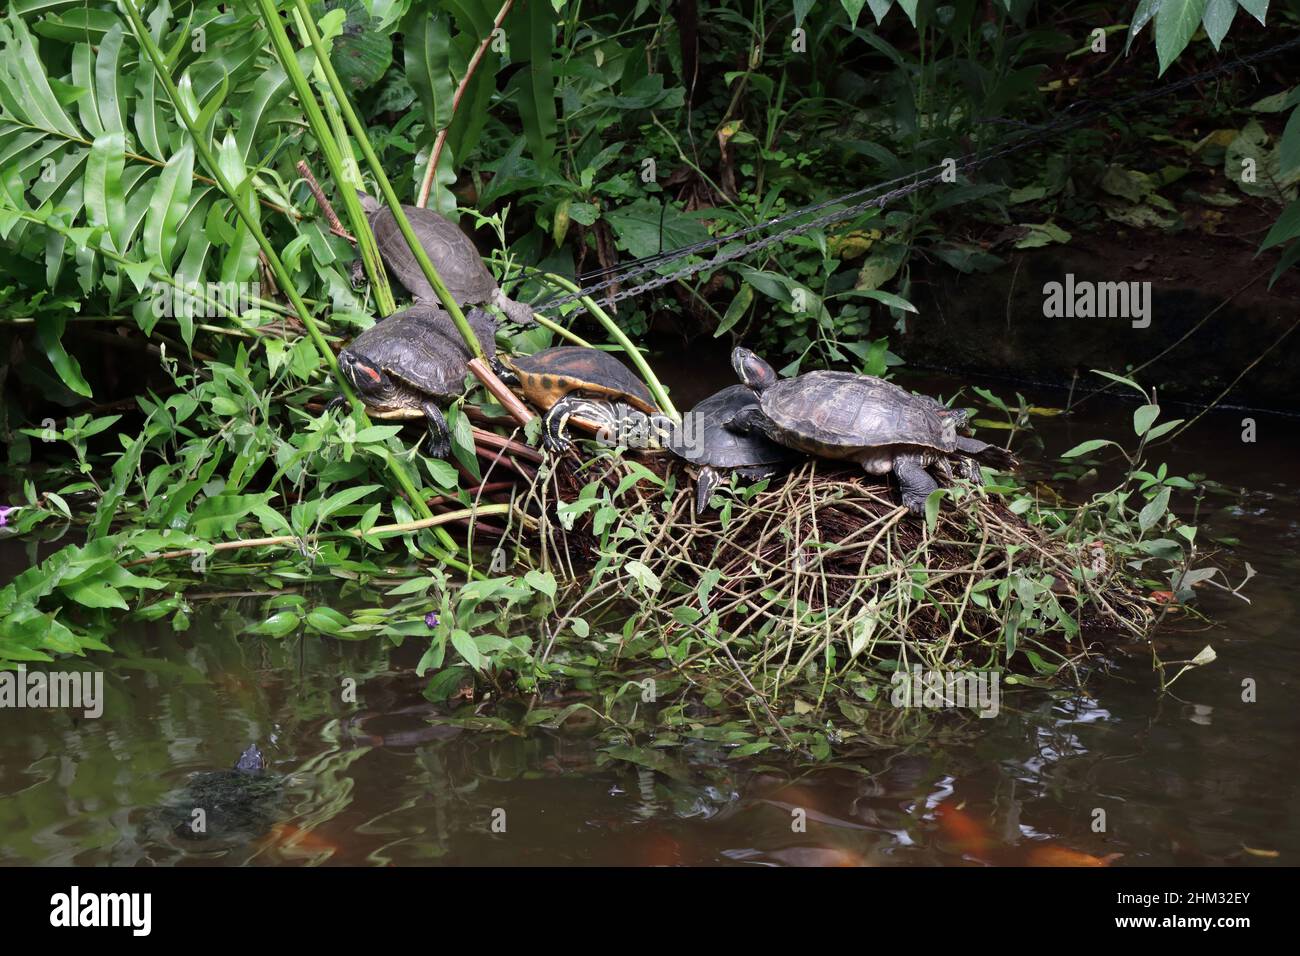 Red Eared Sliders at Tropical Butterfly House, Anston, South Yorkshire, England, UKTrachemys scripta elegans Stock Photo